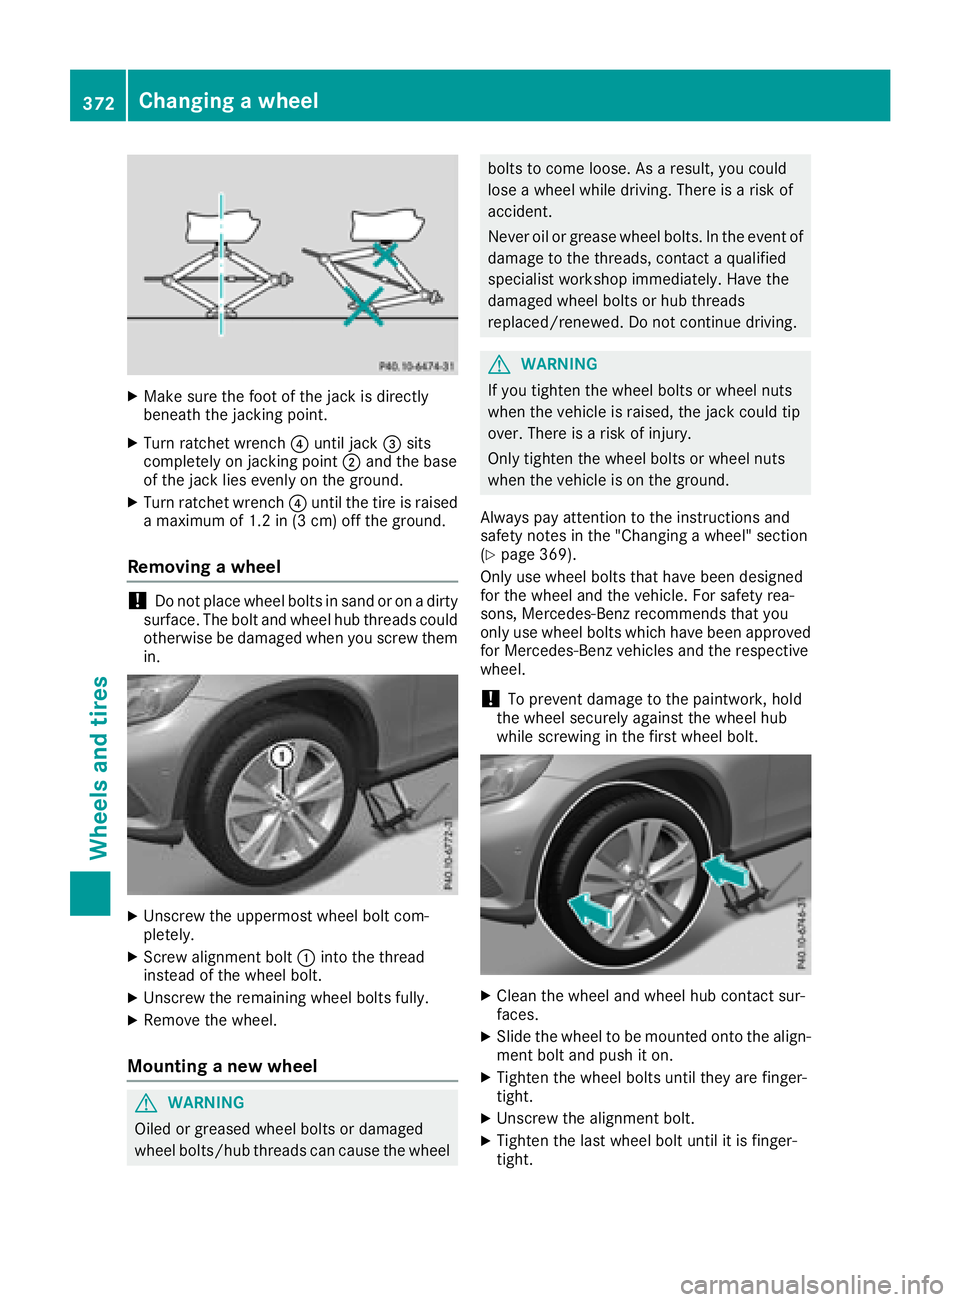 MERCEDES-BENZ GLC SUV 2018  Owners Manual XMake sure the foot of the jack is directly
beneath the jacking point.
XTurn ratchet wrench?until jack =sits
completely on jacking point ;and the base
of the jack lies evenly on the ground.
XTurn ratc